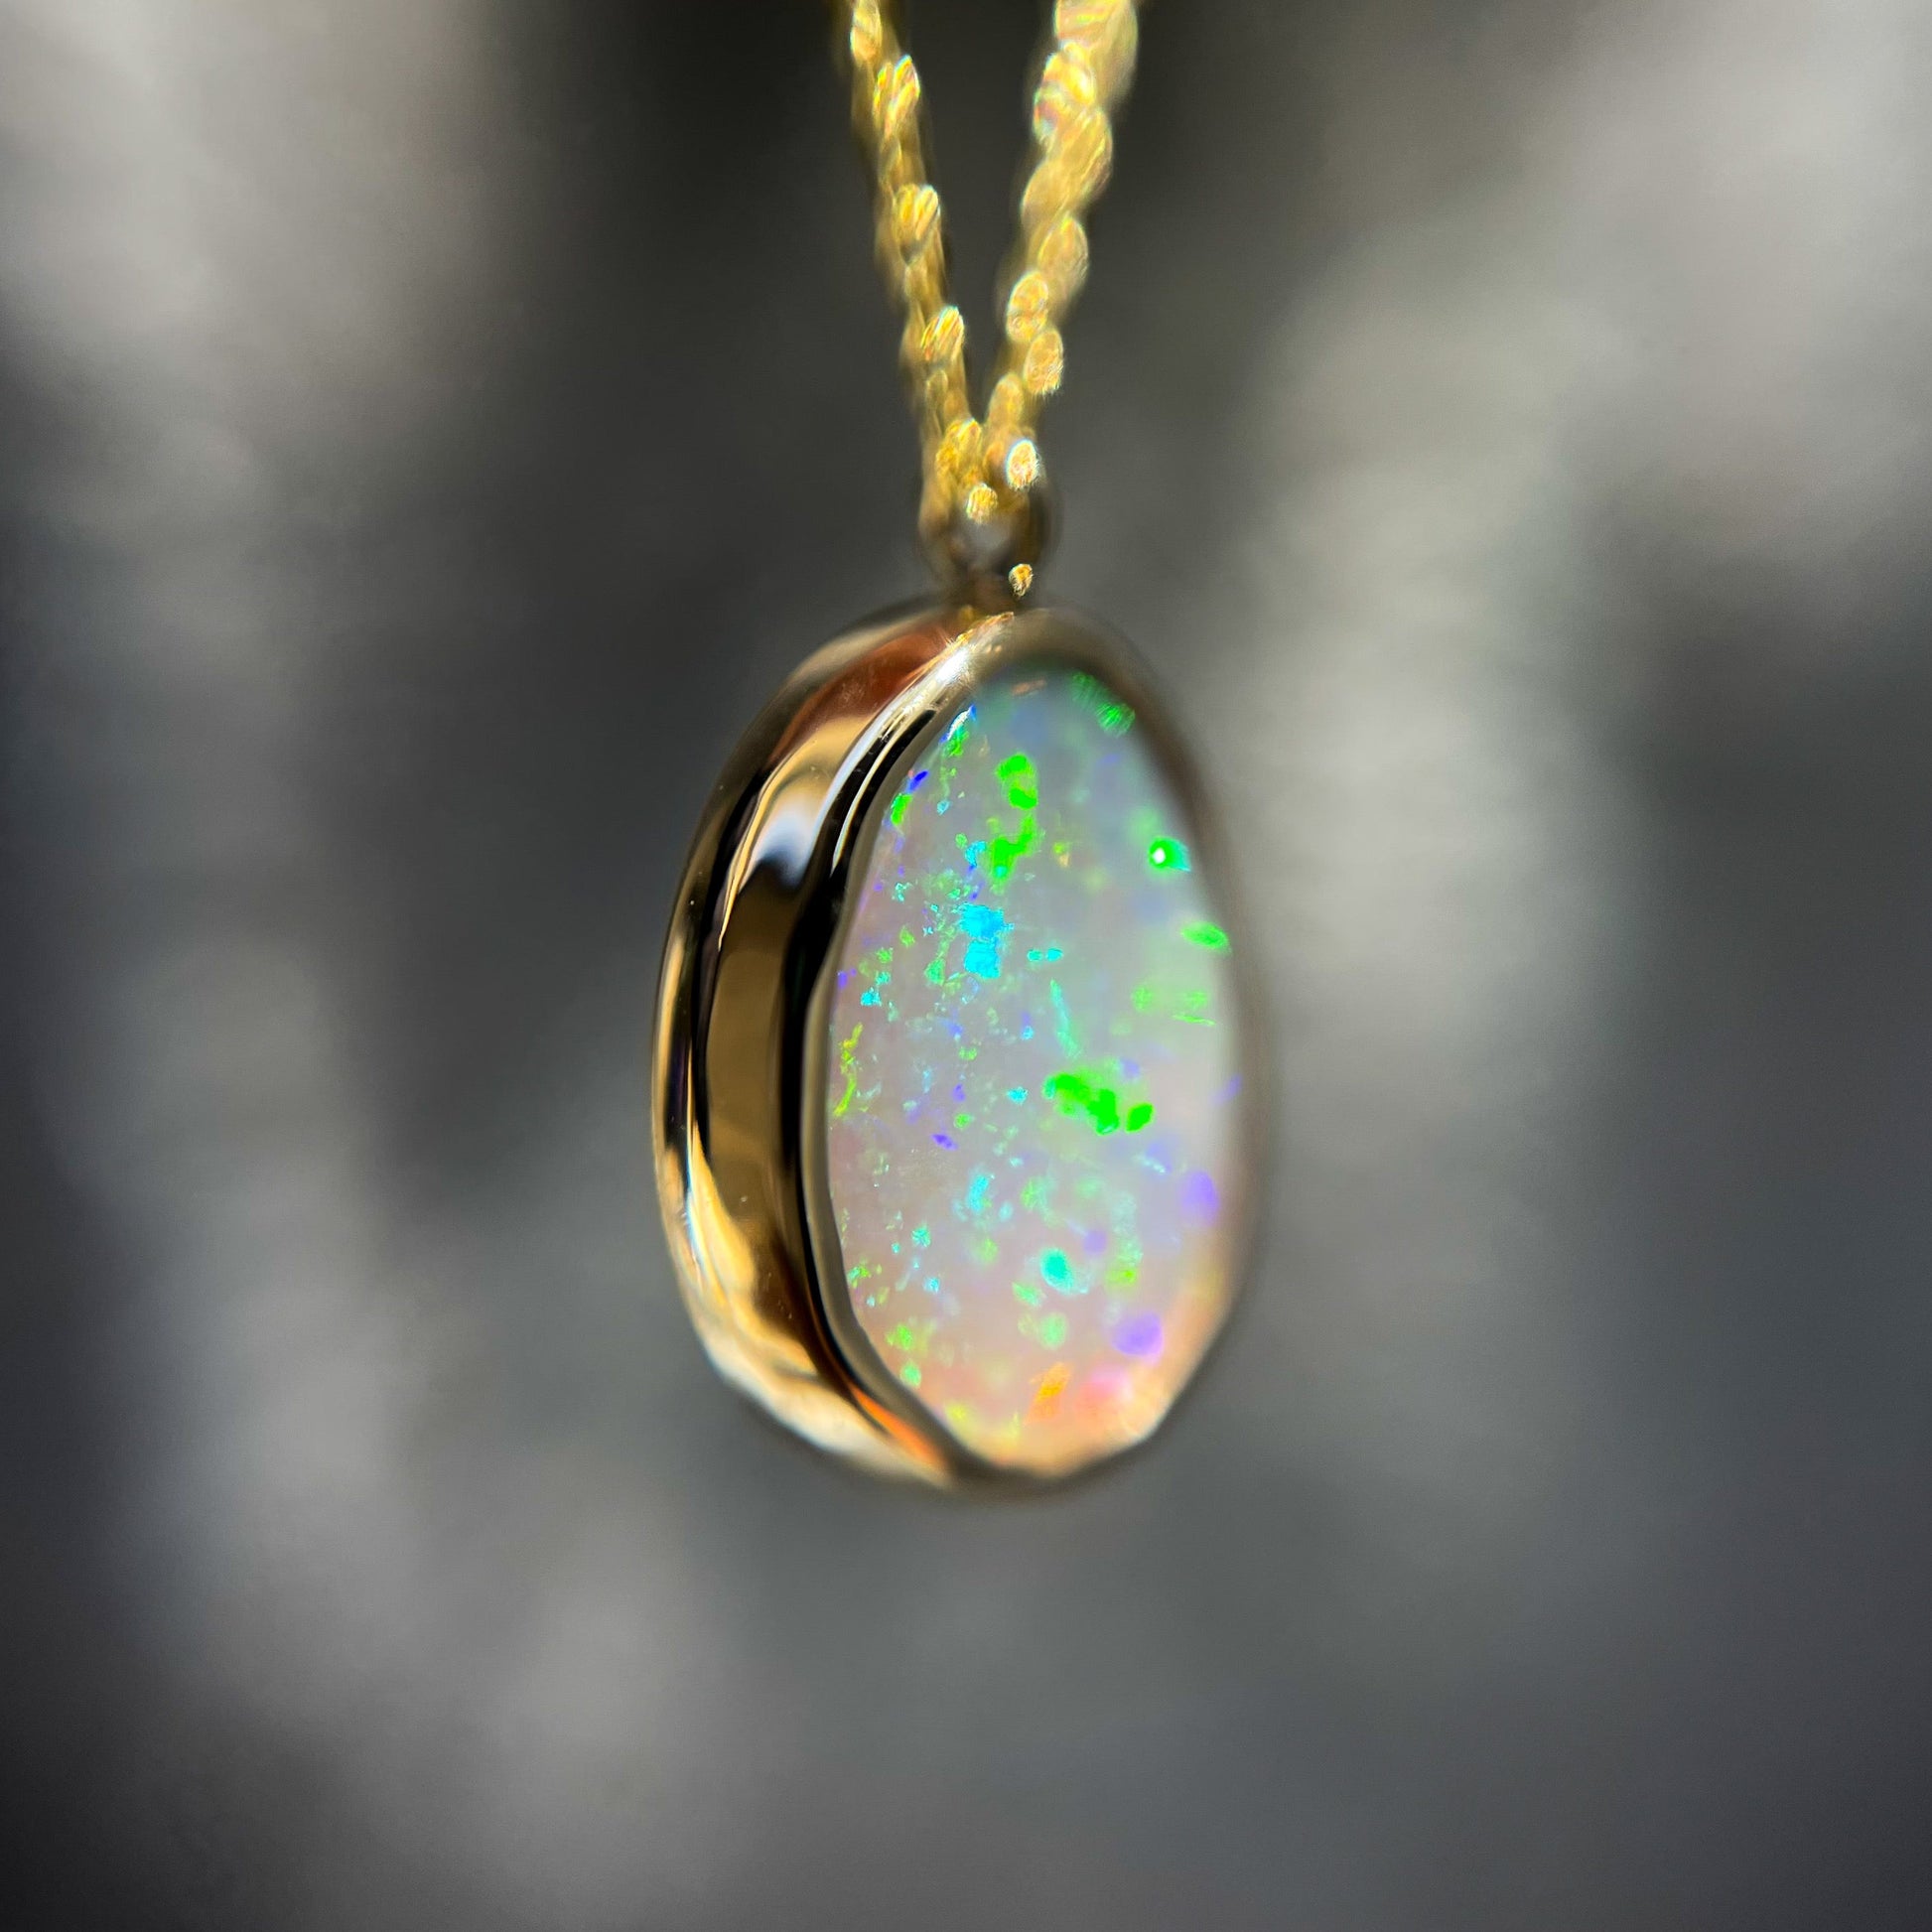 Close up of an Australian Opal Necklace by NIXIN Jewelry showing details of the gold bezel around the lightning ridge black opal.